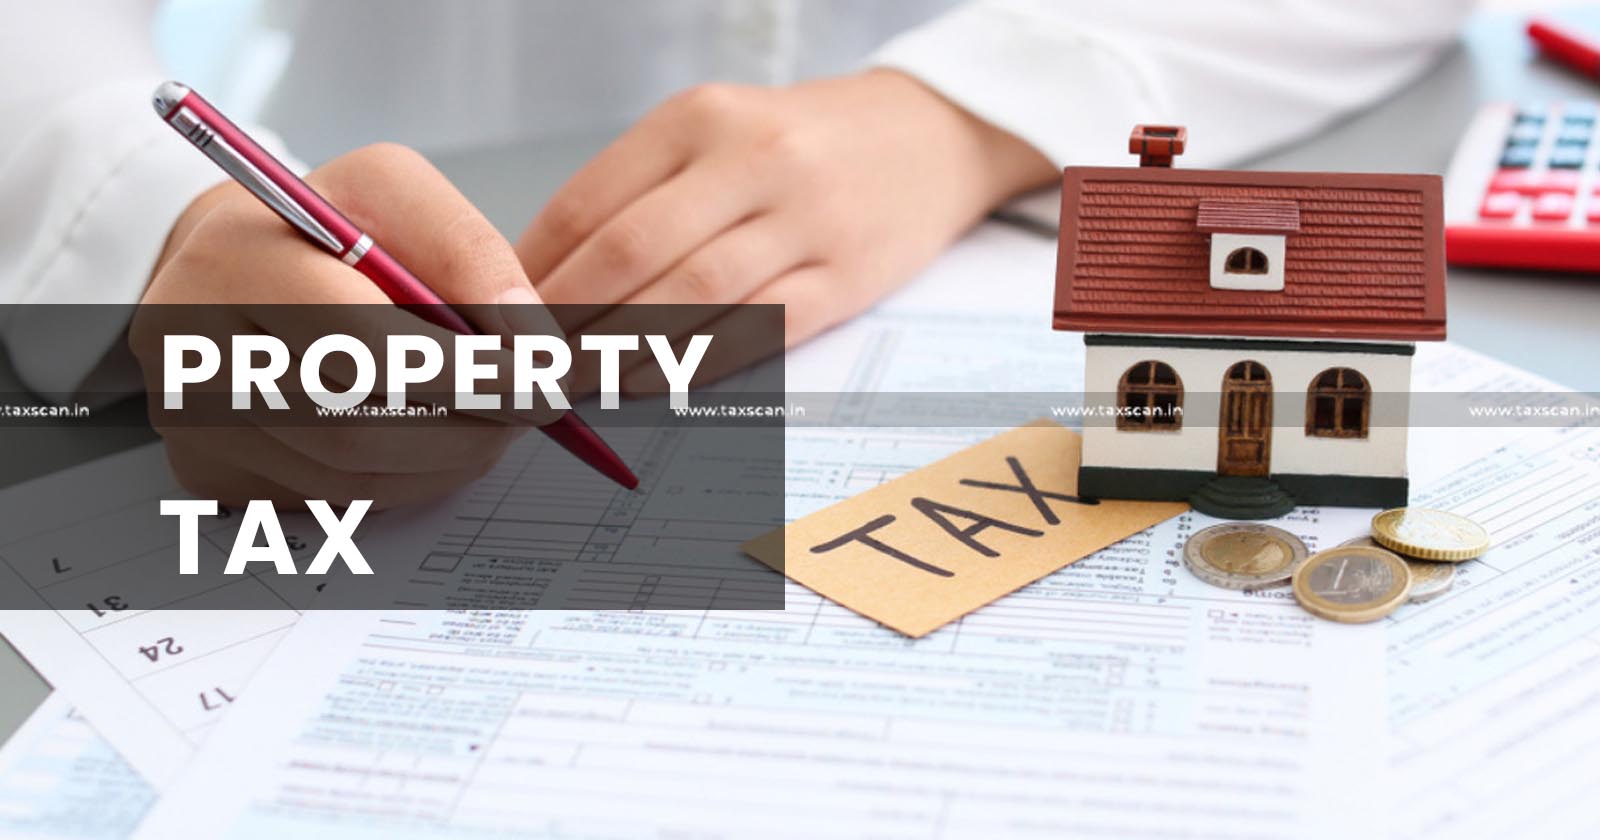 ITAT - Re adjudication - liability of Property Tax paid - behalf of Collector - taxscan